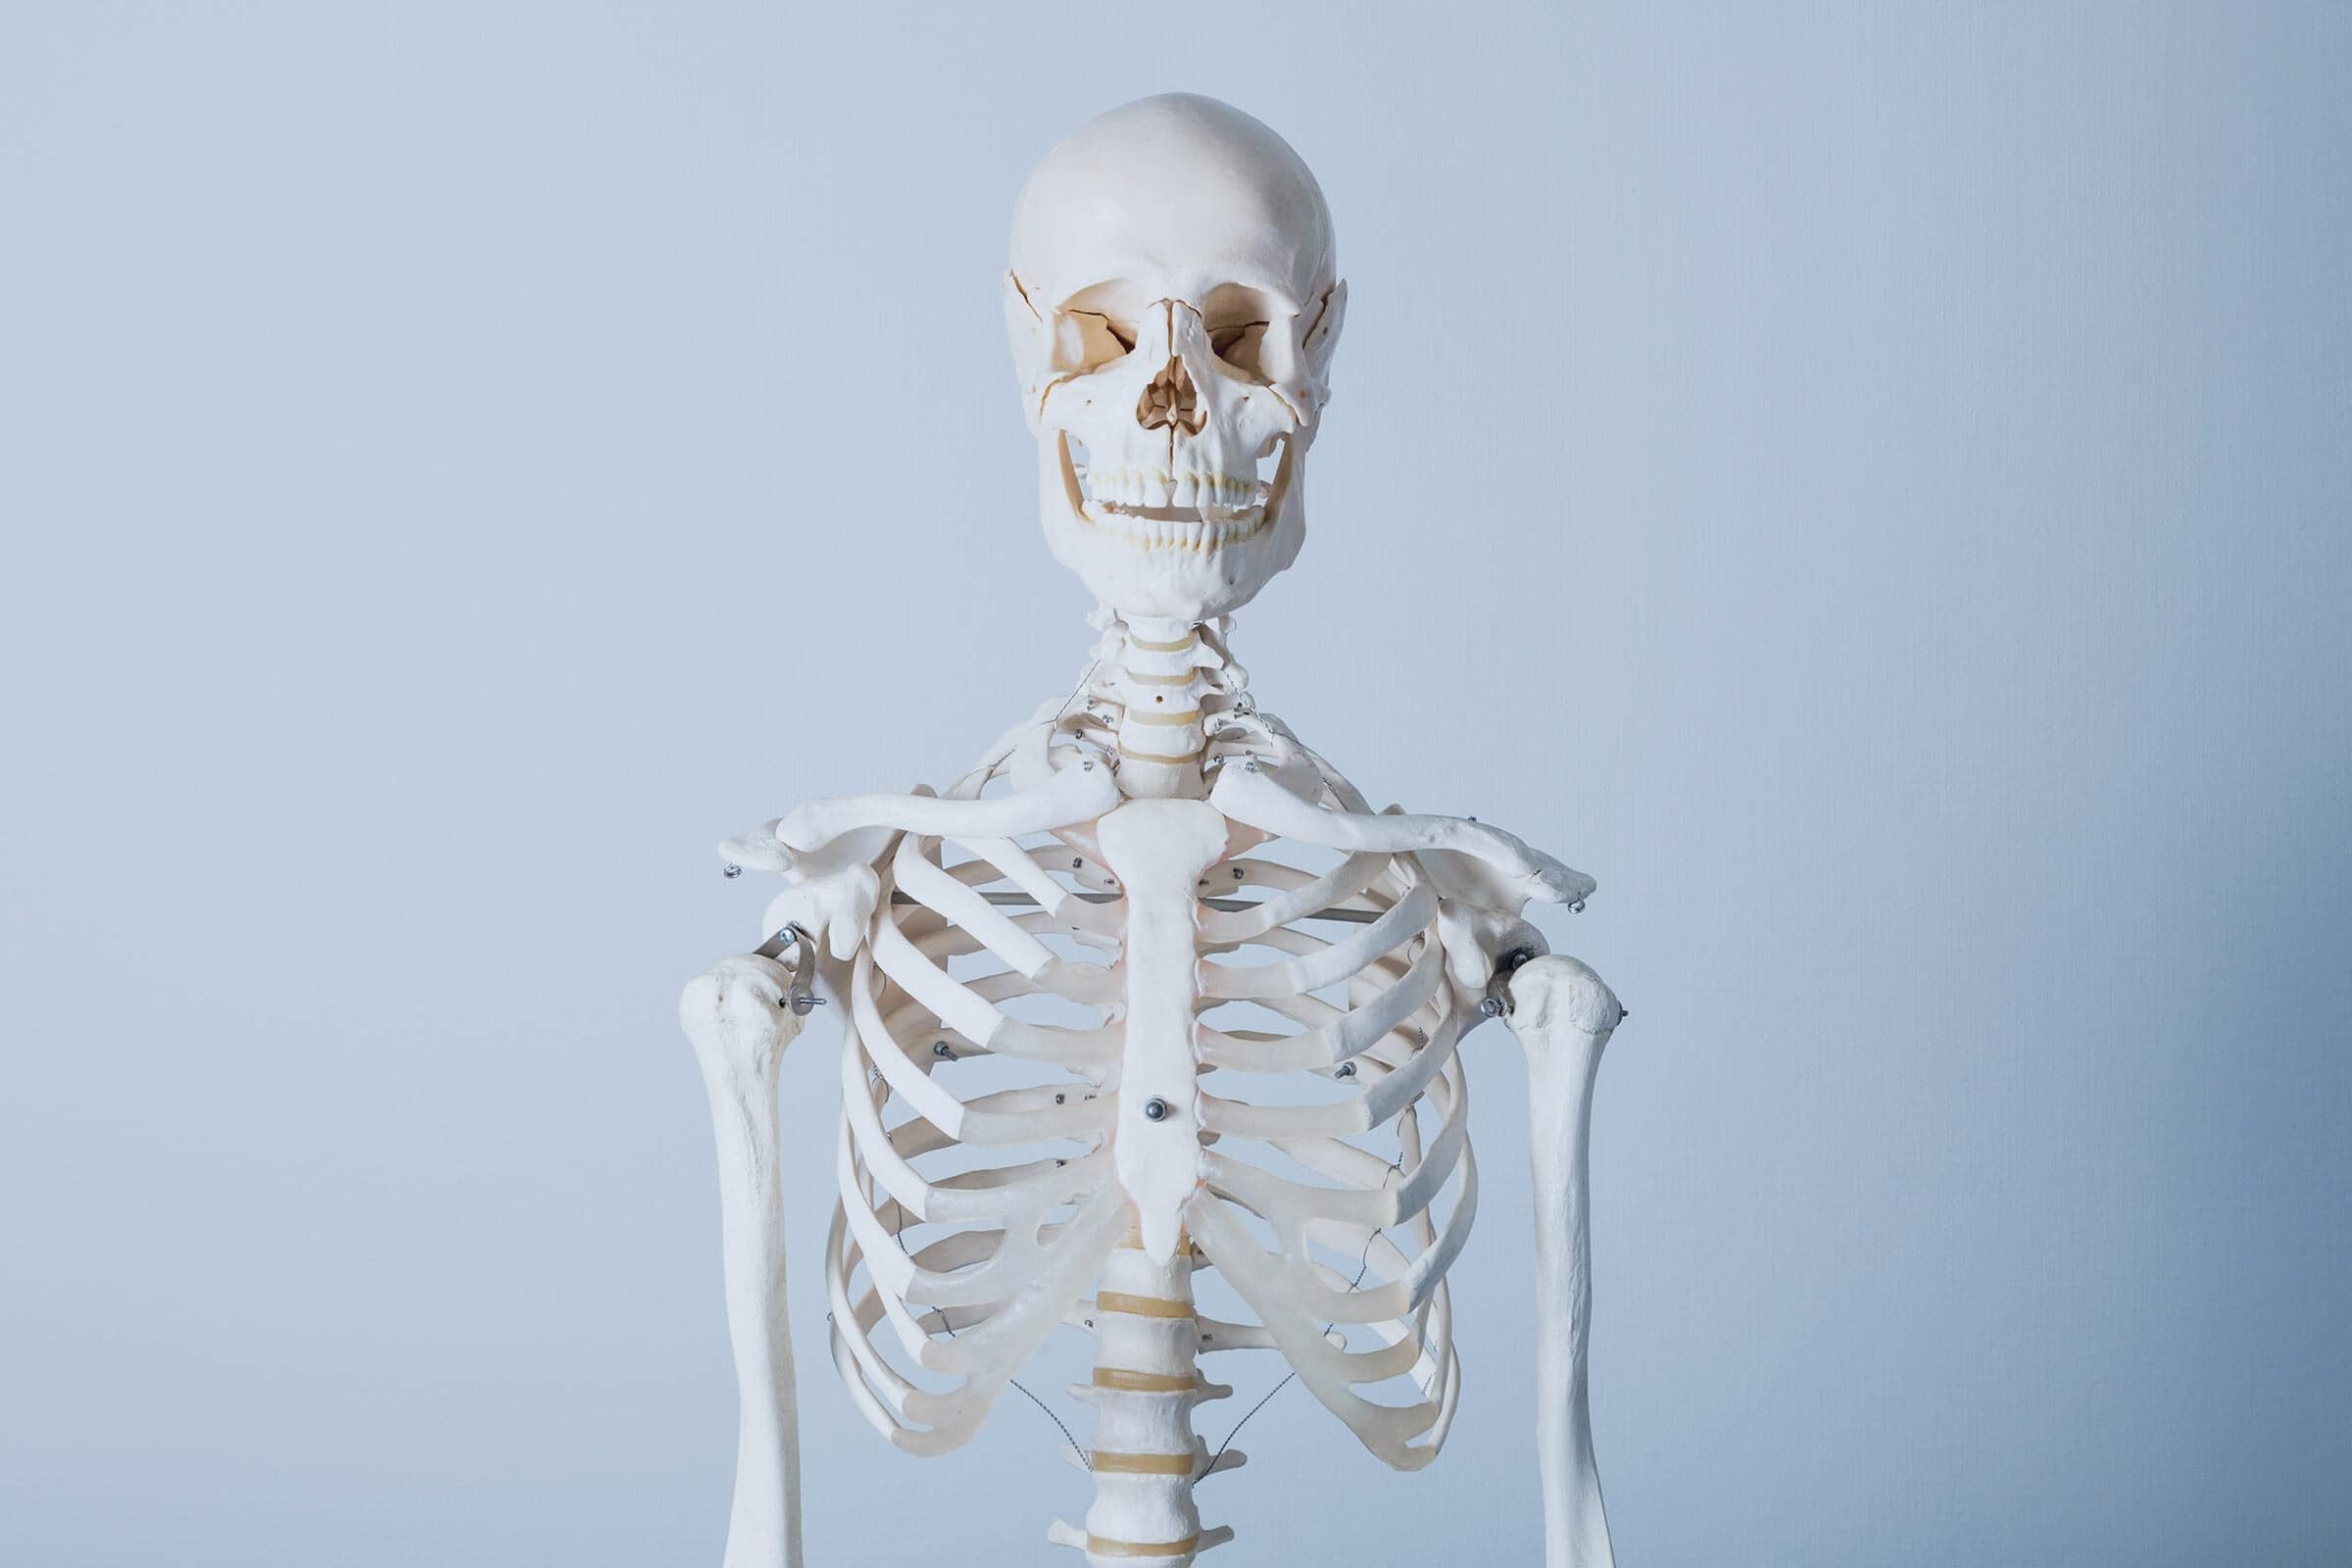 16 Bizarre Things That Happen to Your Body After You Die